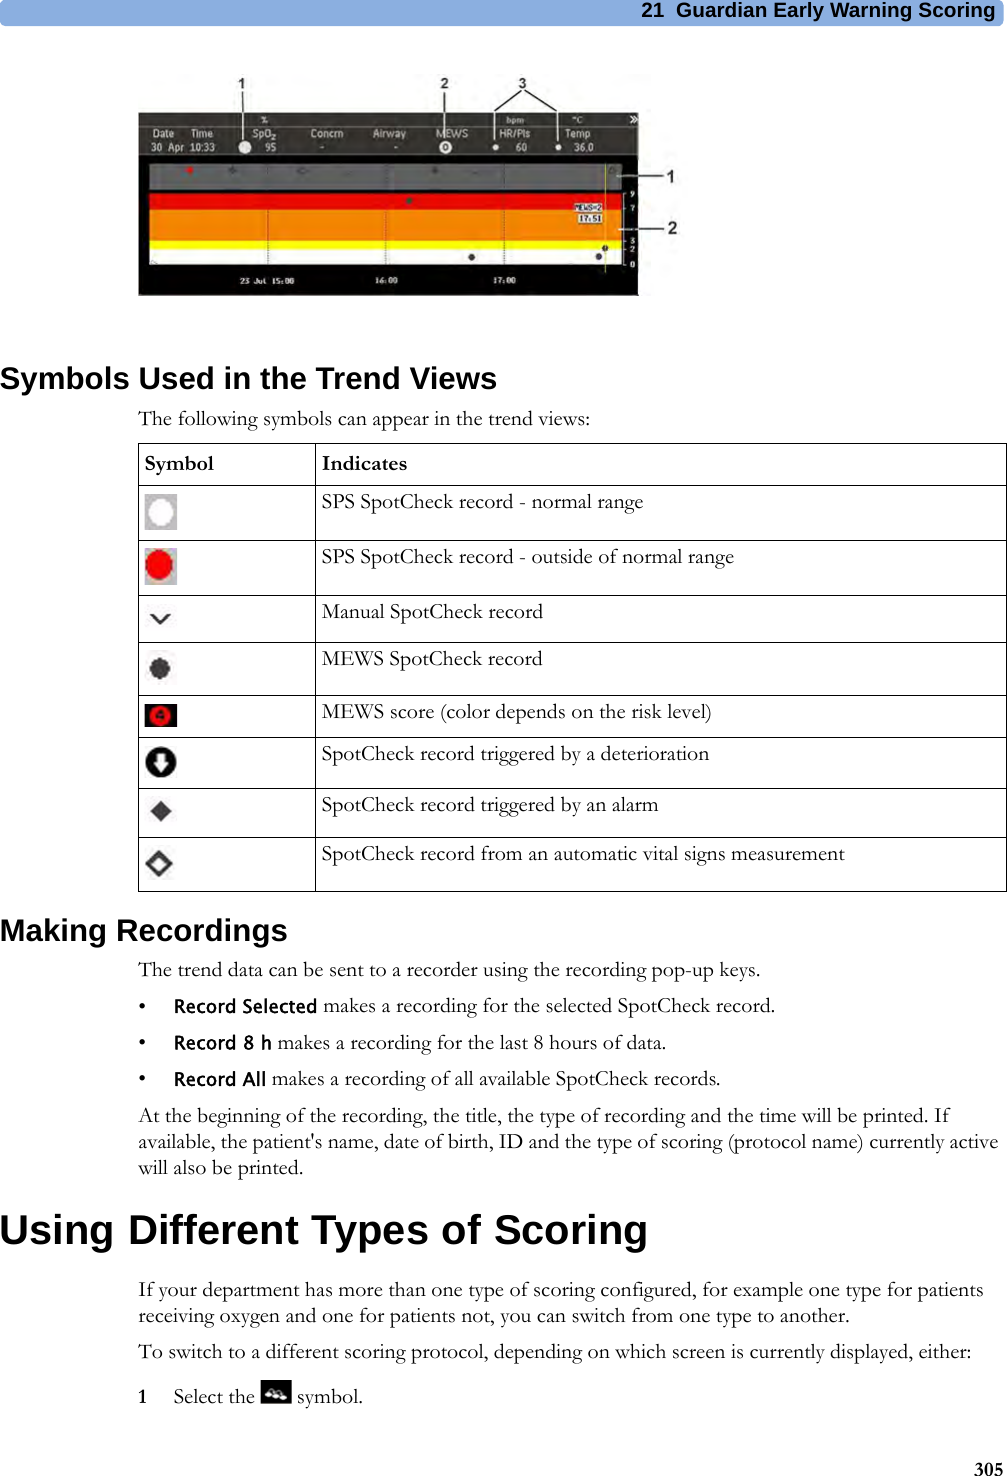 21 Guardian Early Warning Scoring305Symbols Used in the Trend ViewsThe following symbols can appear in the trend views:Making RecordingsThe trend data can be sent to a recorder using the recording pop-up keys.•Record Selected makes a recording for the selected SpotCheck record.•Record 8 h makes a recording for the last 8 hours of data.•Record All makes a recording of all available SpotCheck records.At the beginning of the recording, the title, the type of recording and the time will be printed. If available, the patient&apos;s name, date of birth, ID and the type of scoring (protocol name) currently active will also be printed.Using Different Types of ScoringIf your department has more than one type of scoring configured, for example one type for patients receiving oxygen and one for patients not, you can switch from one type to another.To switch to a different scoring protocol, depending on which screen is currently displayed, either:1Select the   symbol.Symbol IndicatesSPS SpotCheck record - normal rangeSPS SpotCheck record - outside of normal rangeManual SpotCheck recordMEWS SpotCheck recordMEWS score (color depends on the risk level)SpotCheck record triggered by a deteriorationSpotCheck record triggered by an alarmSpotCheck record from an automatic vital signs measurement